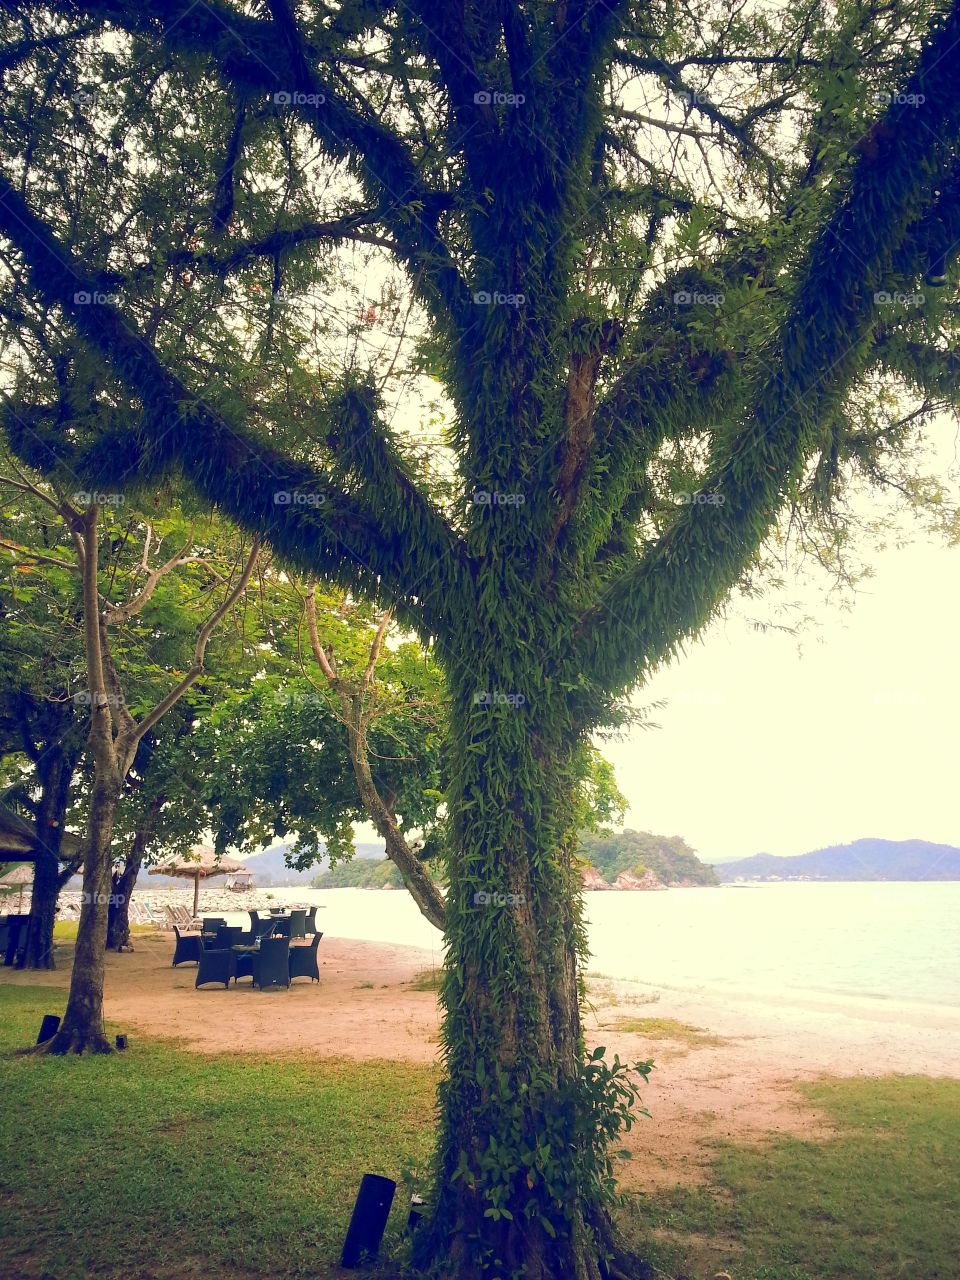 Beautiful tree with amazing green coming out of it. One of the most amazing things I've ever seen in Langkawi, Malaysia